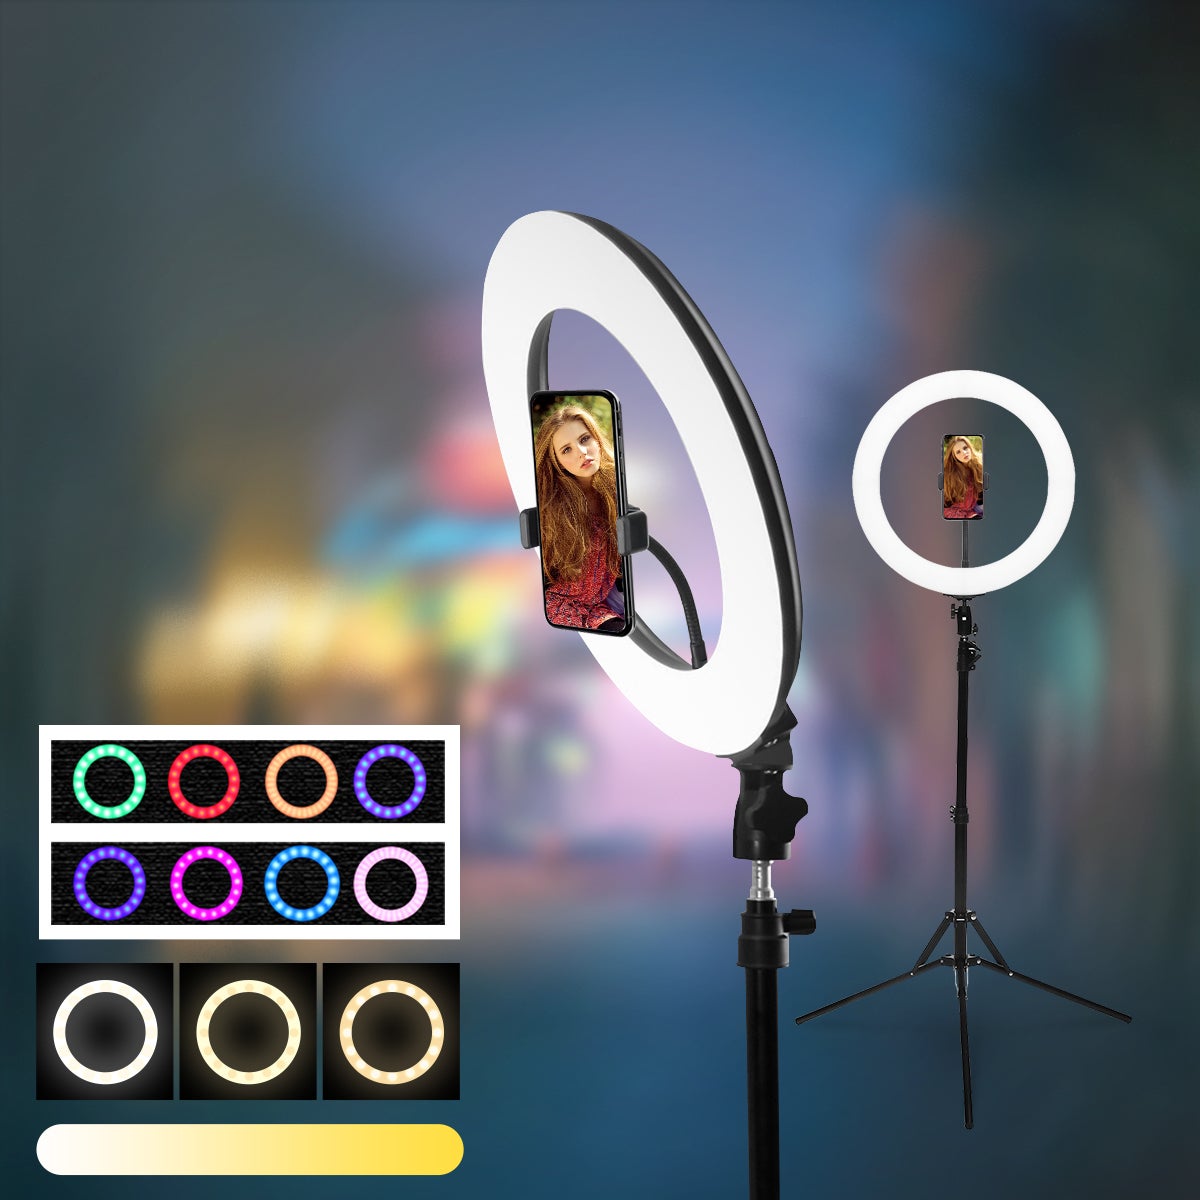 19' LED Ring Light Dimmable Stand Adjustable height Make up light Beauty Studio Video Camera live